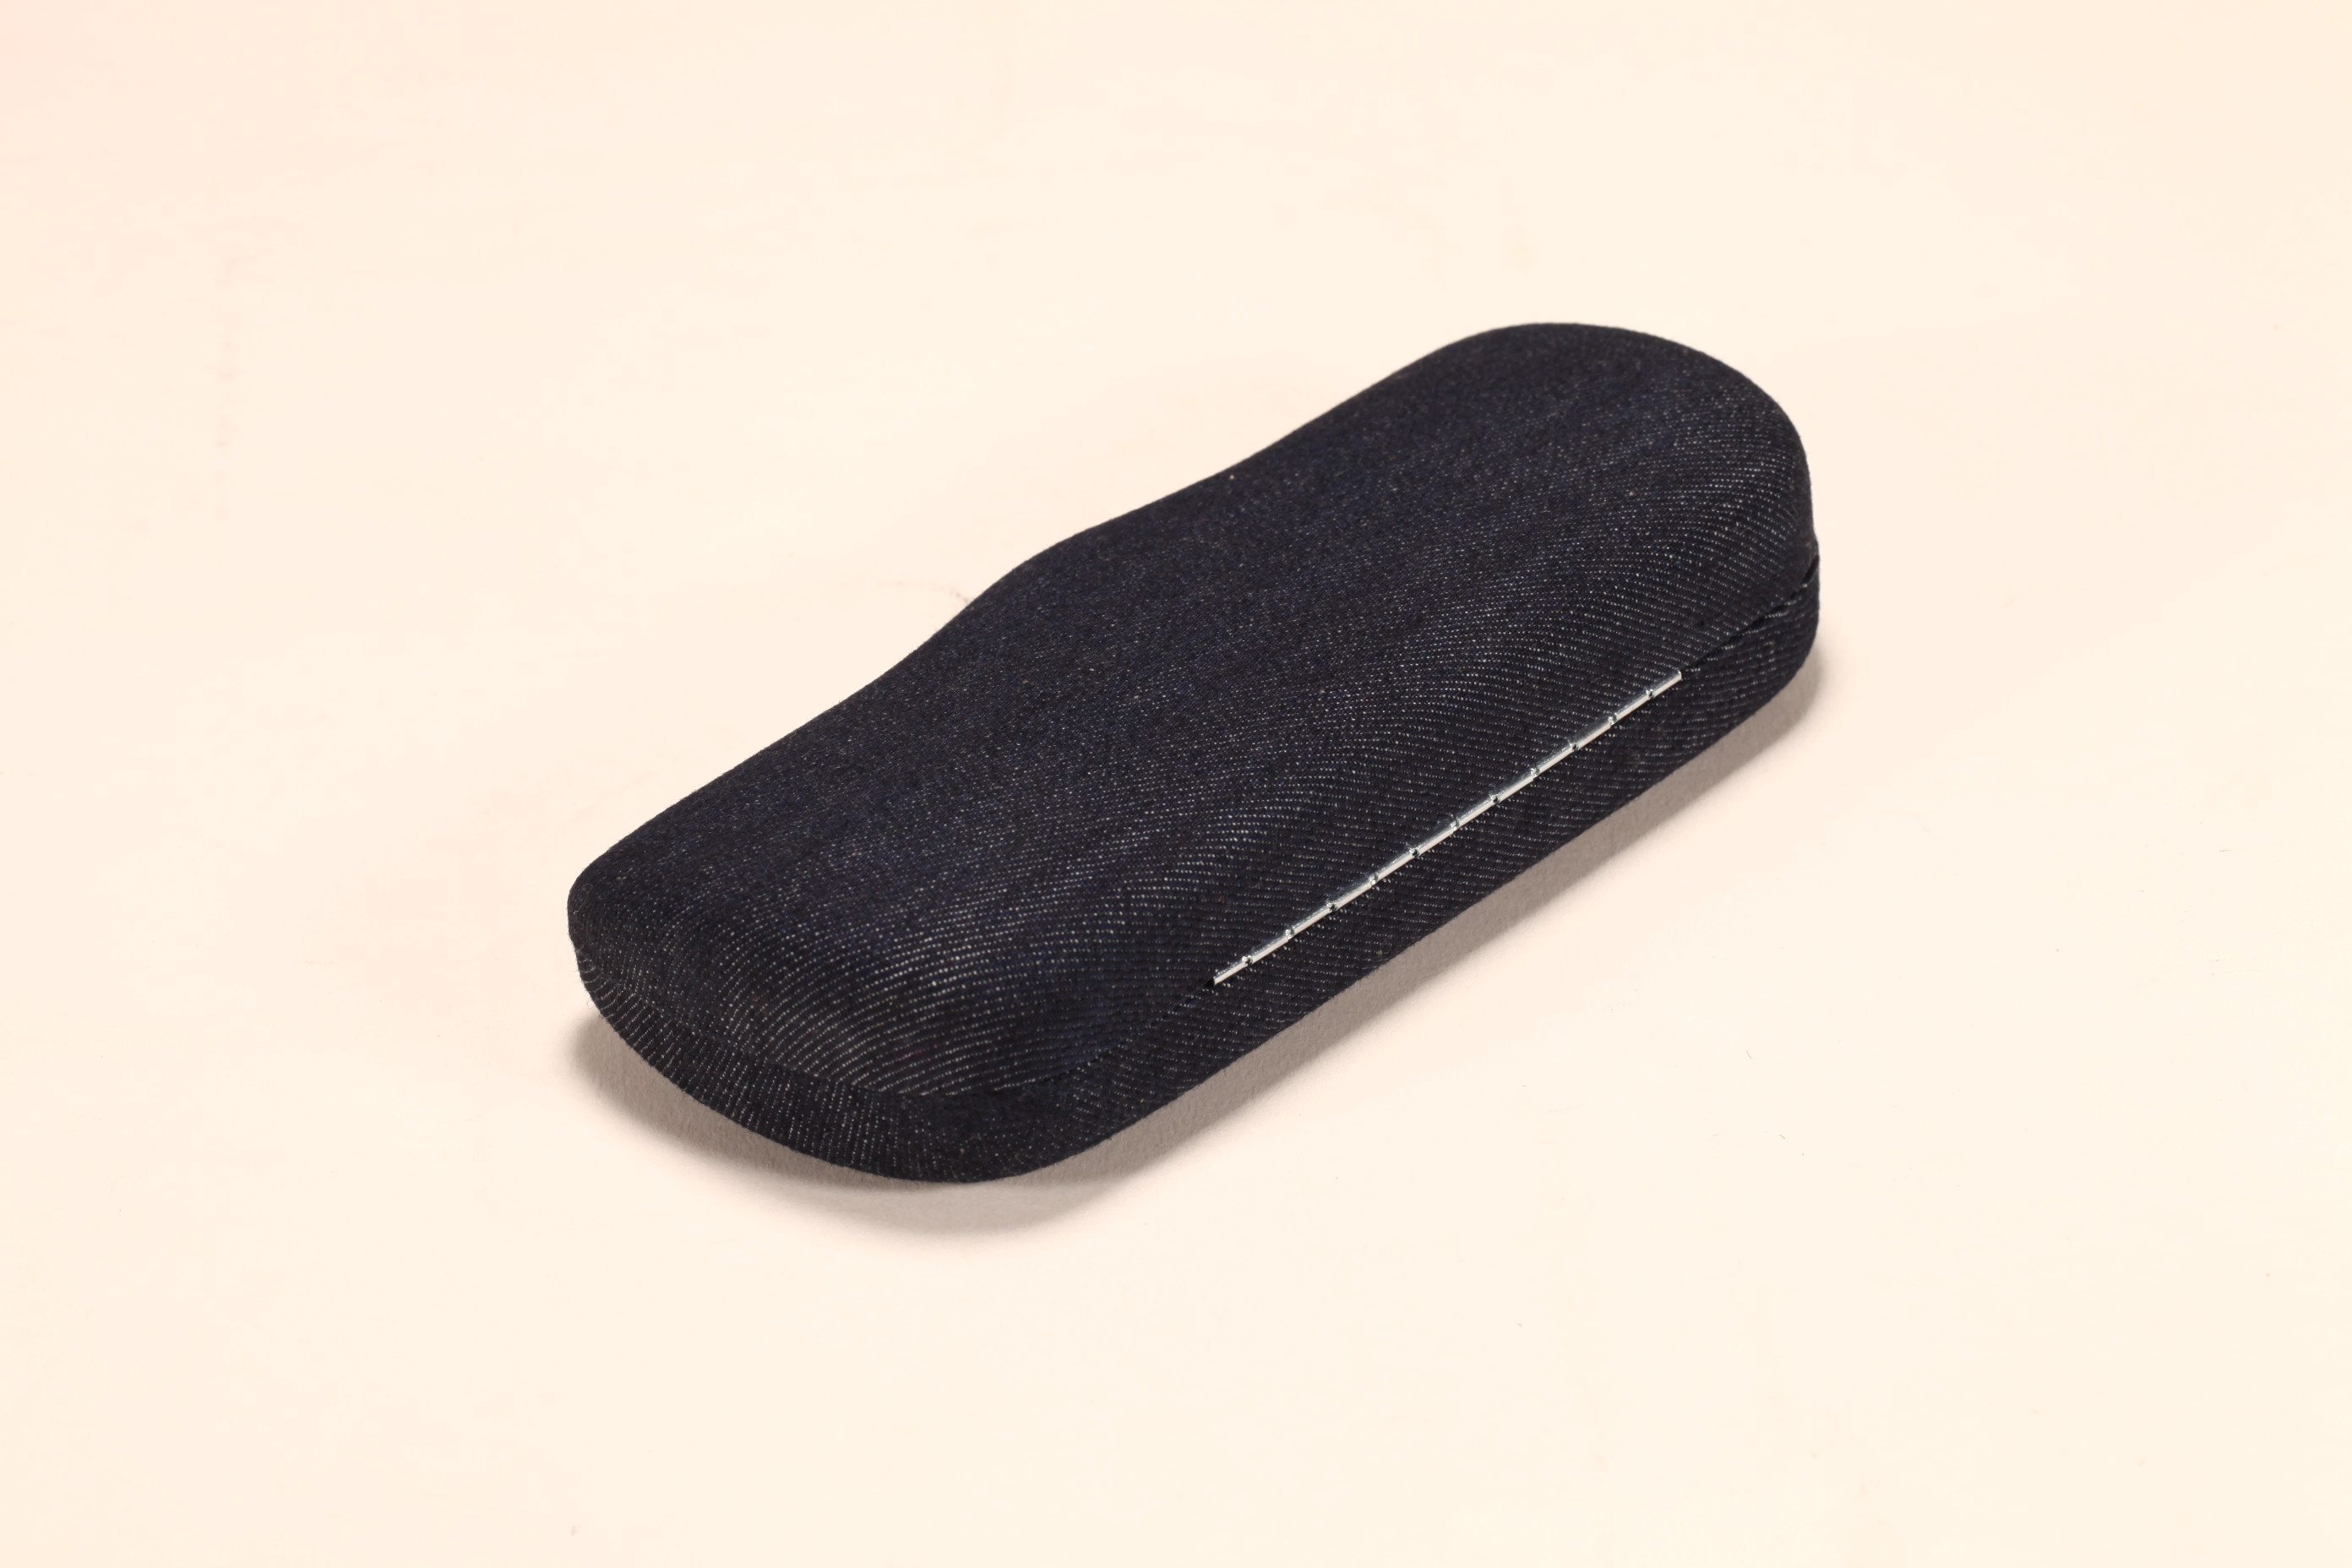 A black denim eyeglasses case with a LOGO lining that can be customized